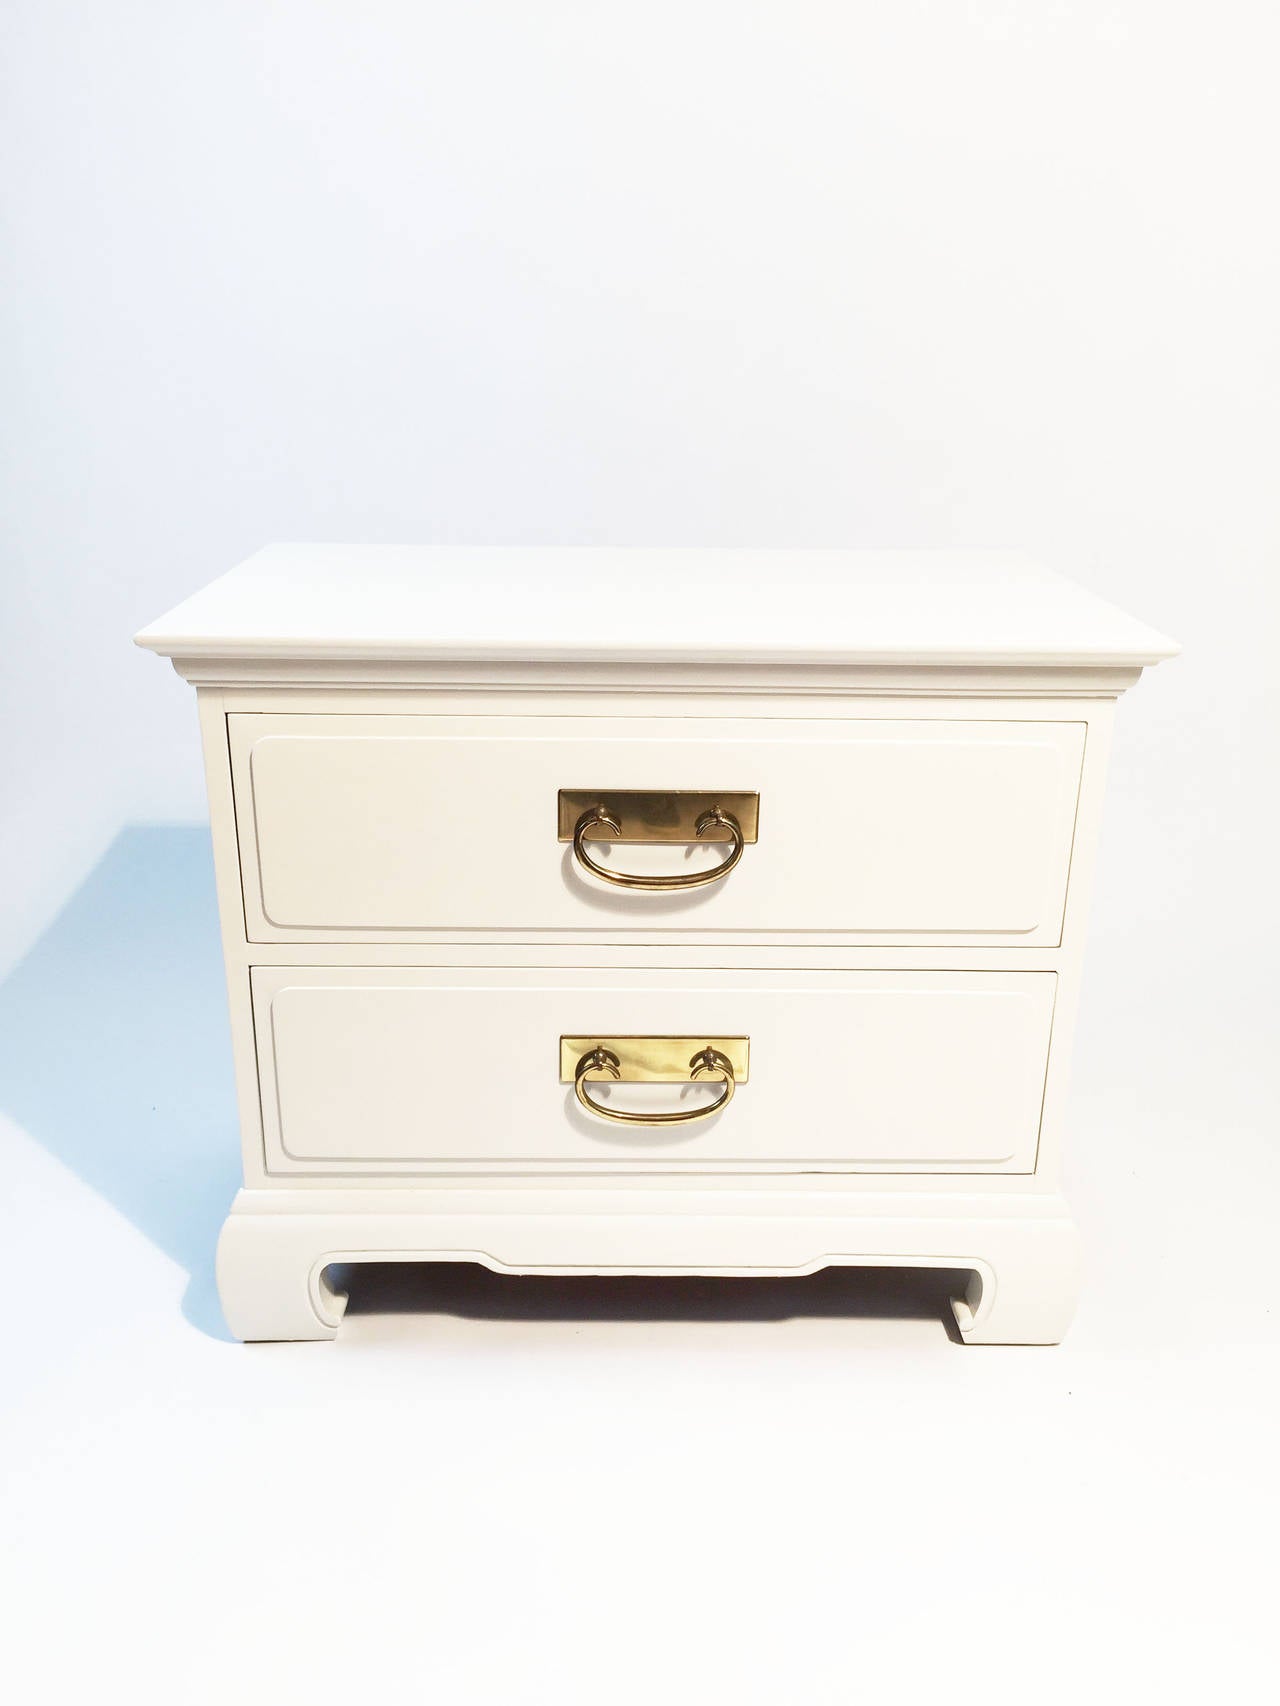 Lacquered White Hollywood Regency Nightstands by Davis